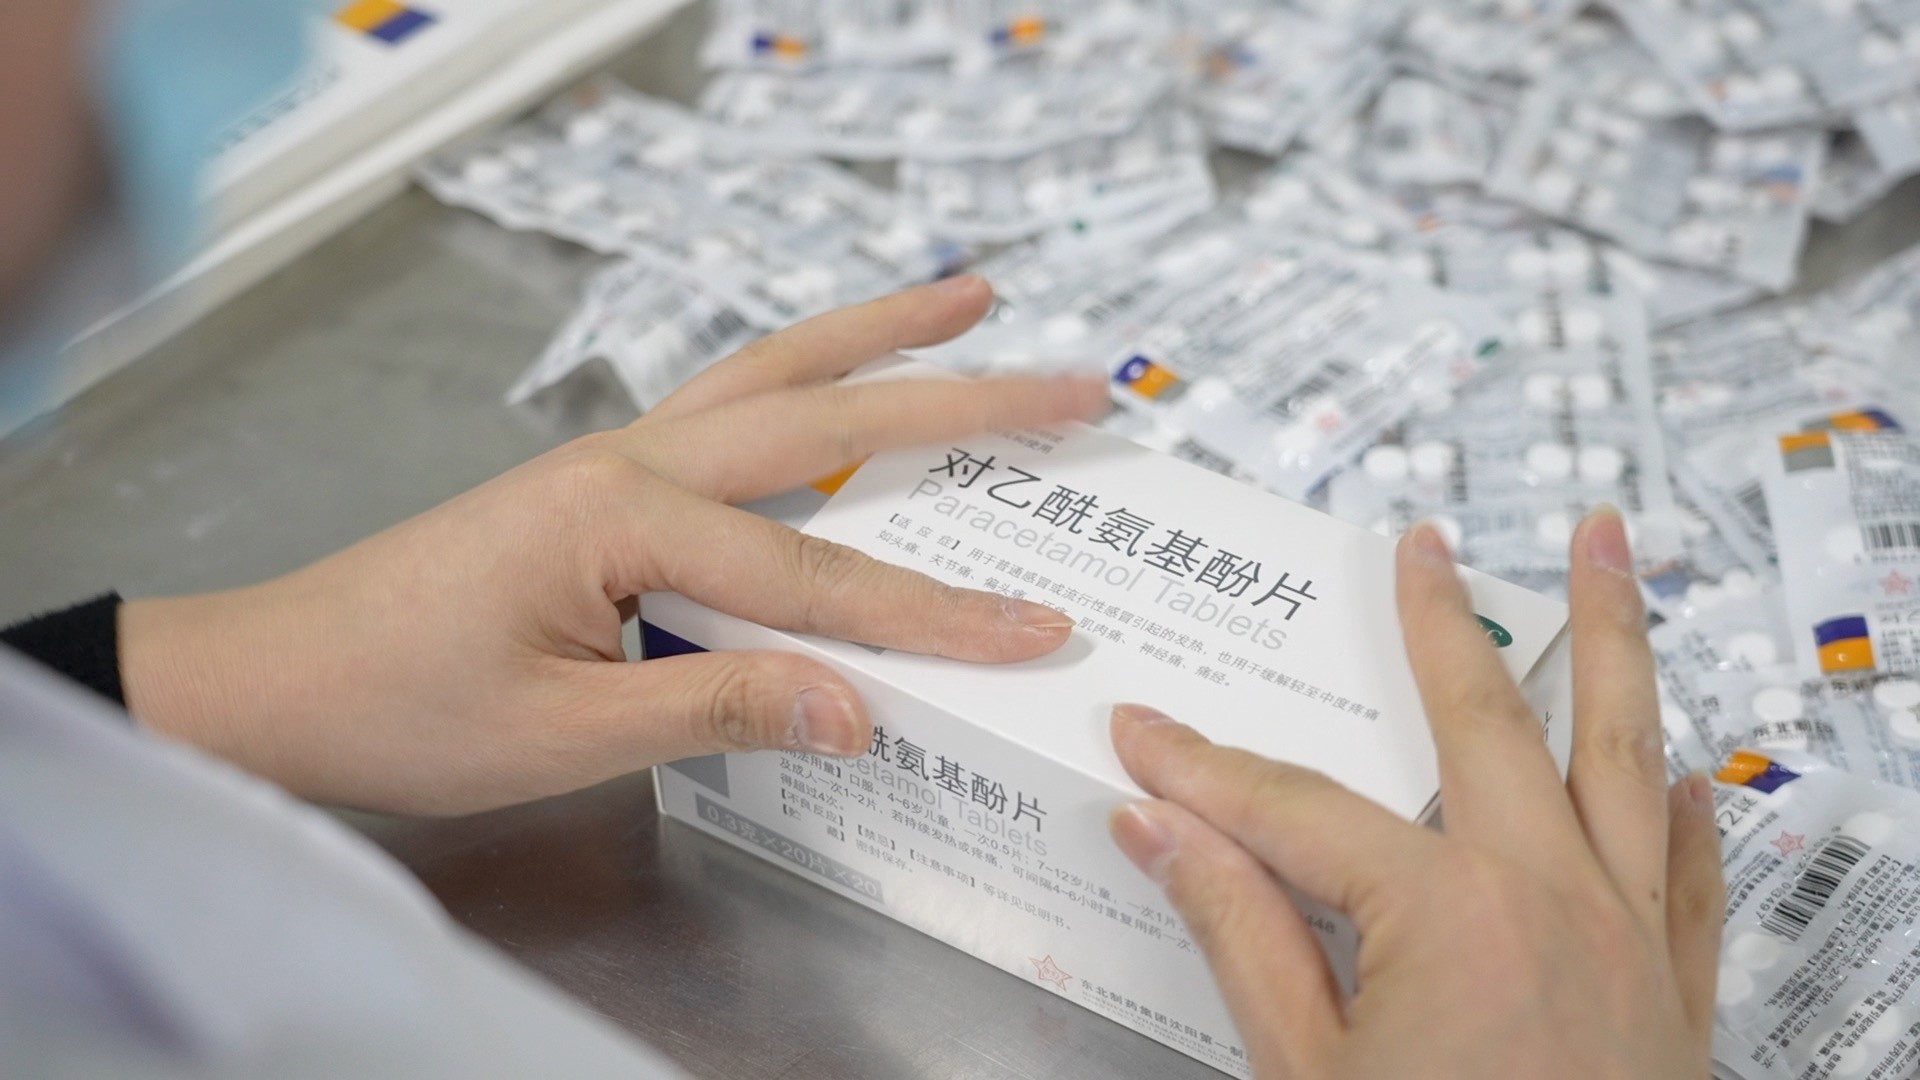 Paracetamol has been used to treat fever and pain for more than 60 years. Now, medical experts in China recommend it be the first port of call in the treatment of COVID-19 amid a new surge in cases across the country. /CGTN